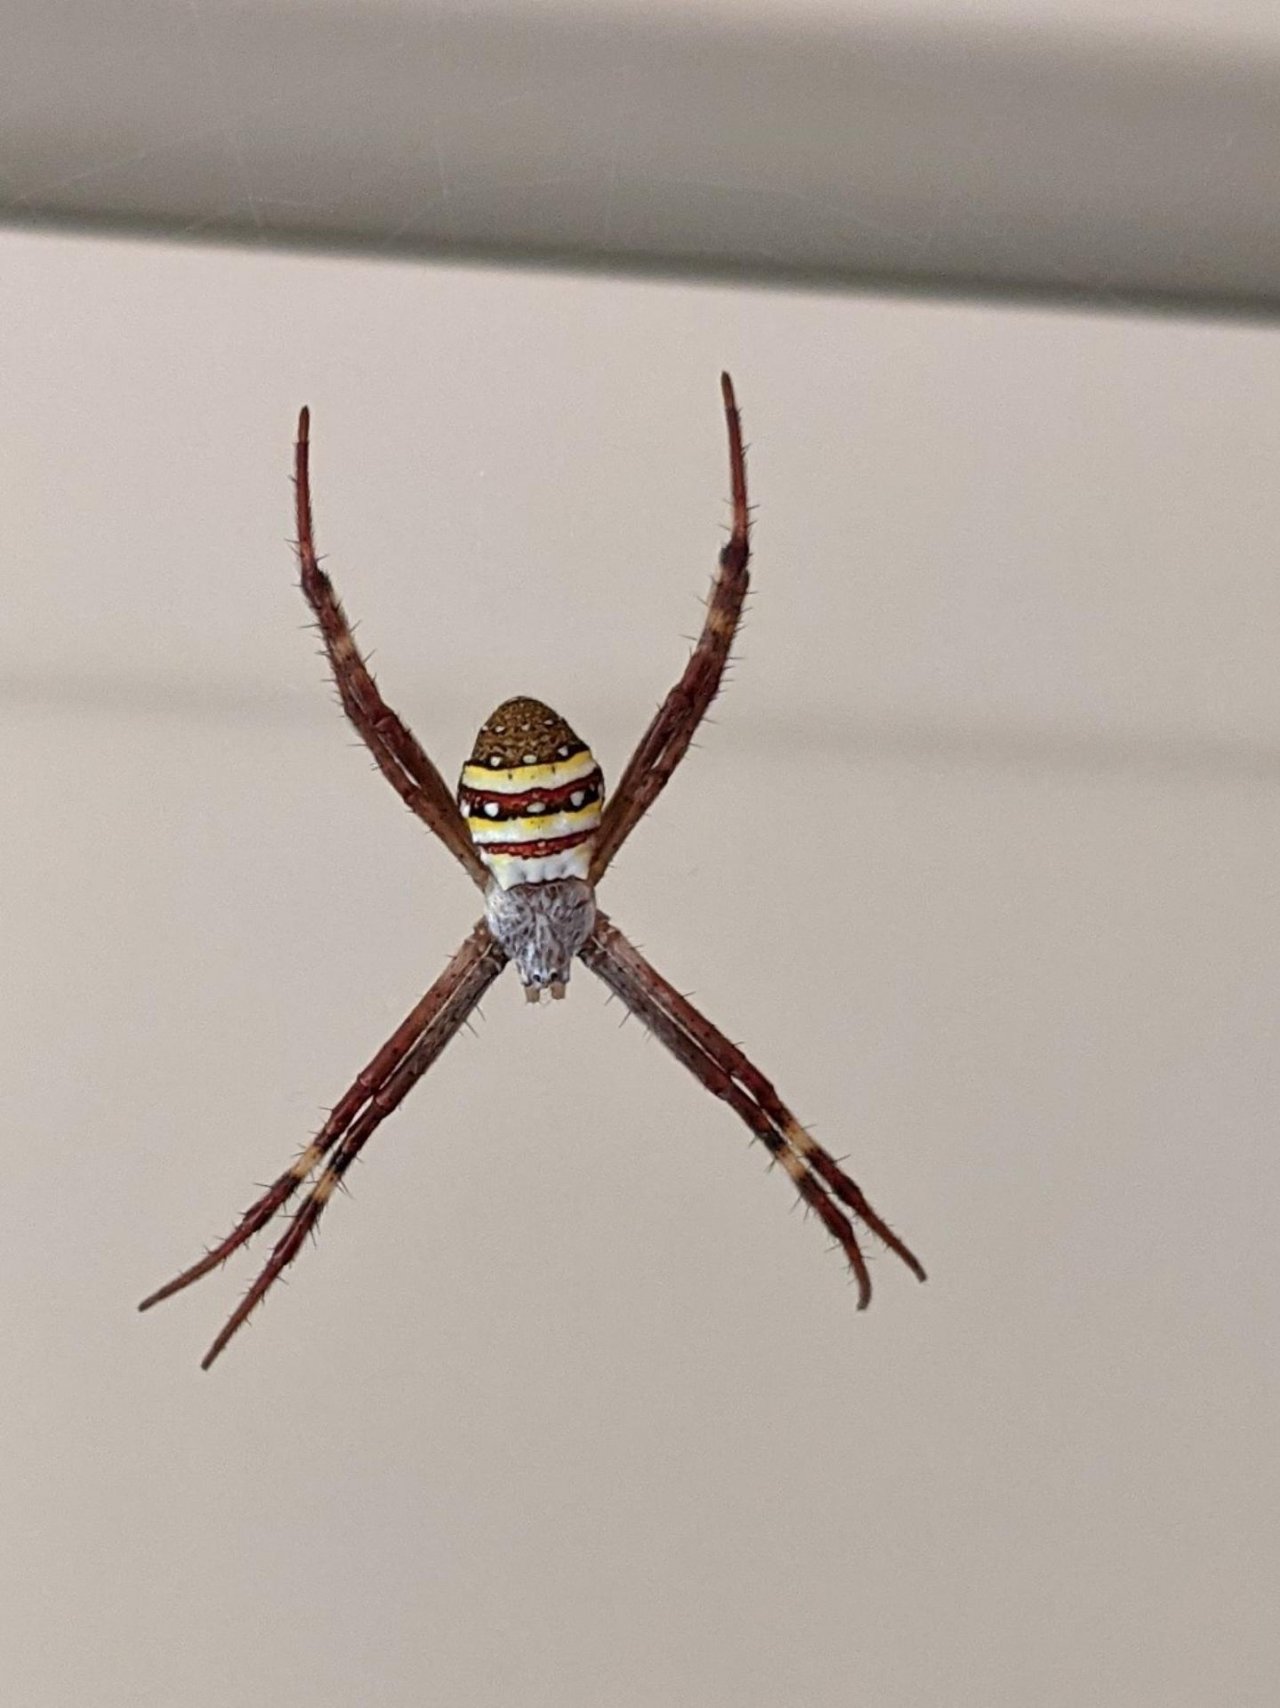 St Andrew’s Cross Spider in ClimateWatch App spotted by Sandra McCullough on 25.12.2020